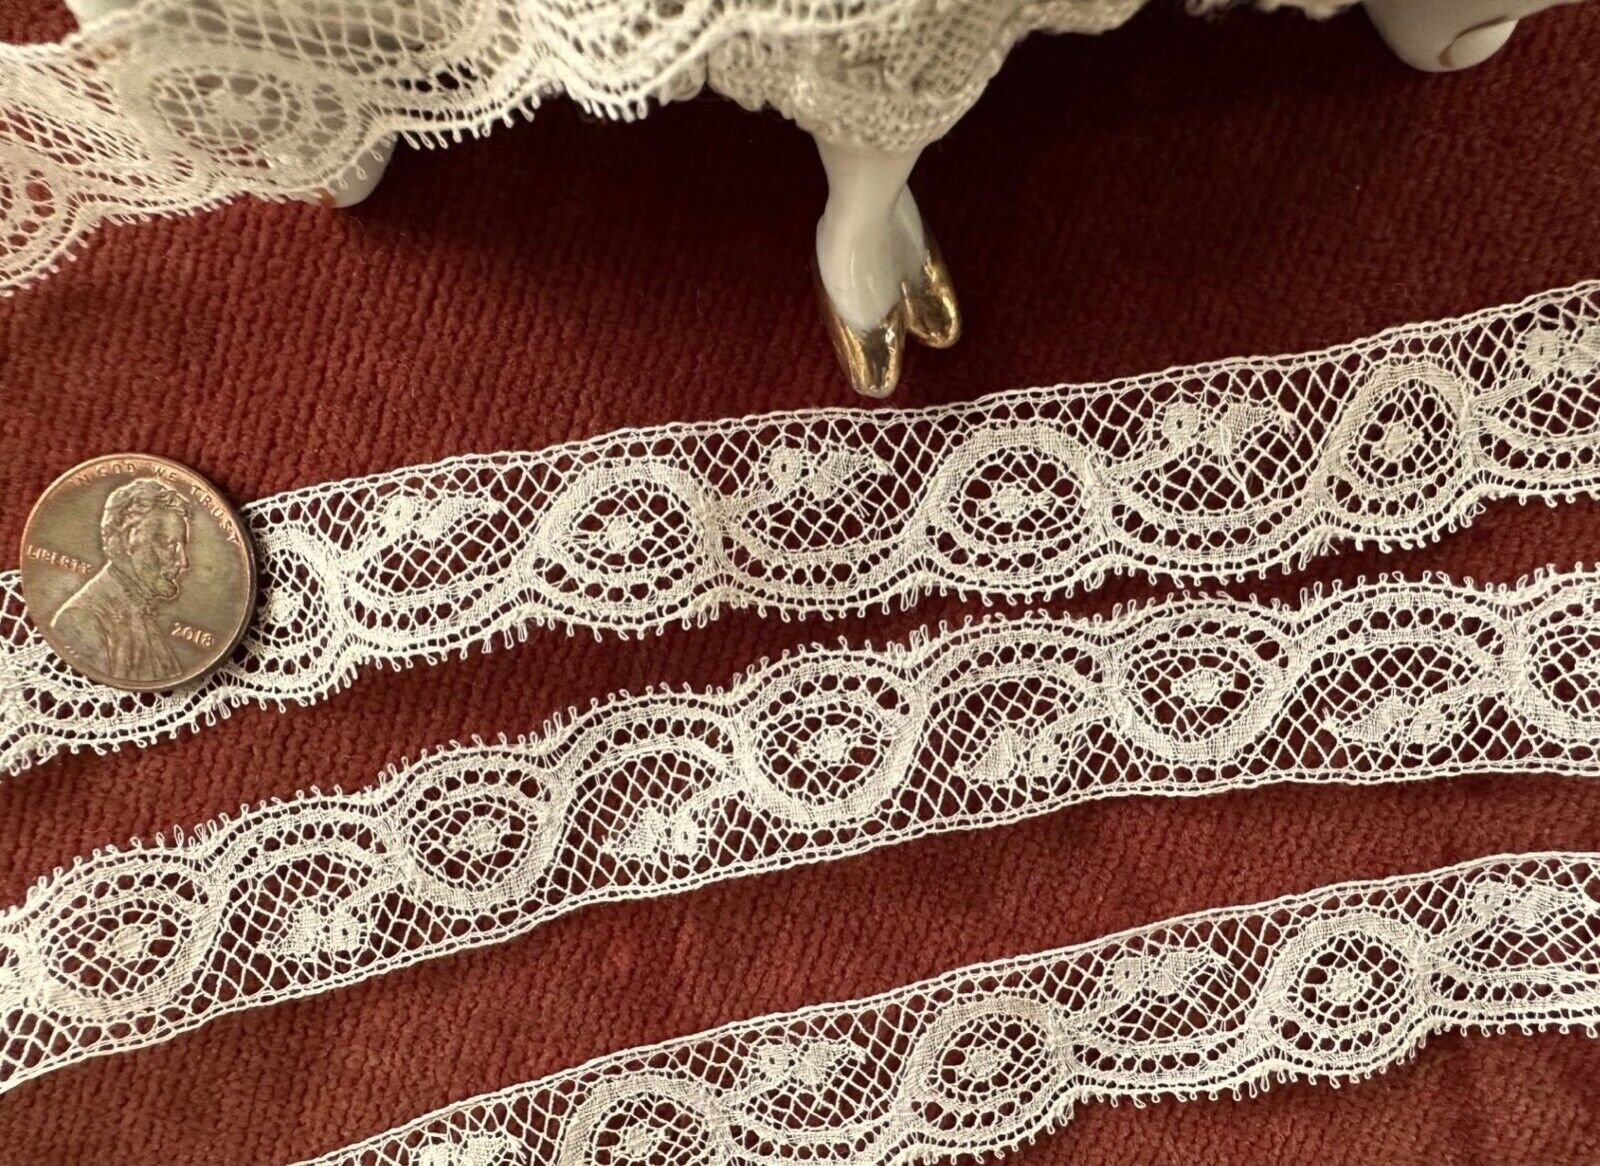 Antique Vtg Lace-NARROW SCALLOPED FRENCH VALENCIENNES EDGING LACE TRIM #2 OF 5